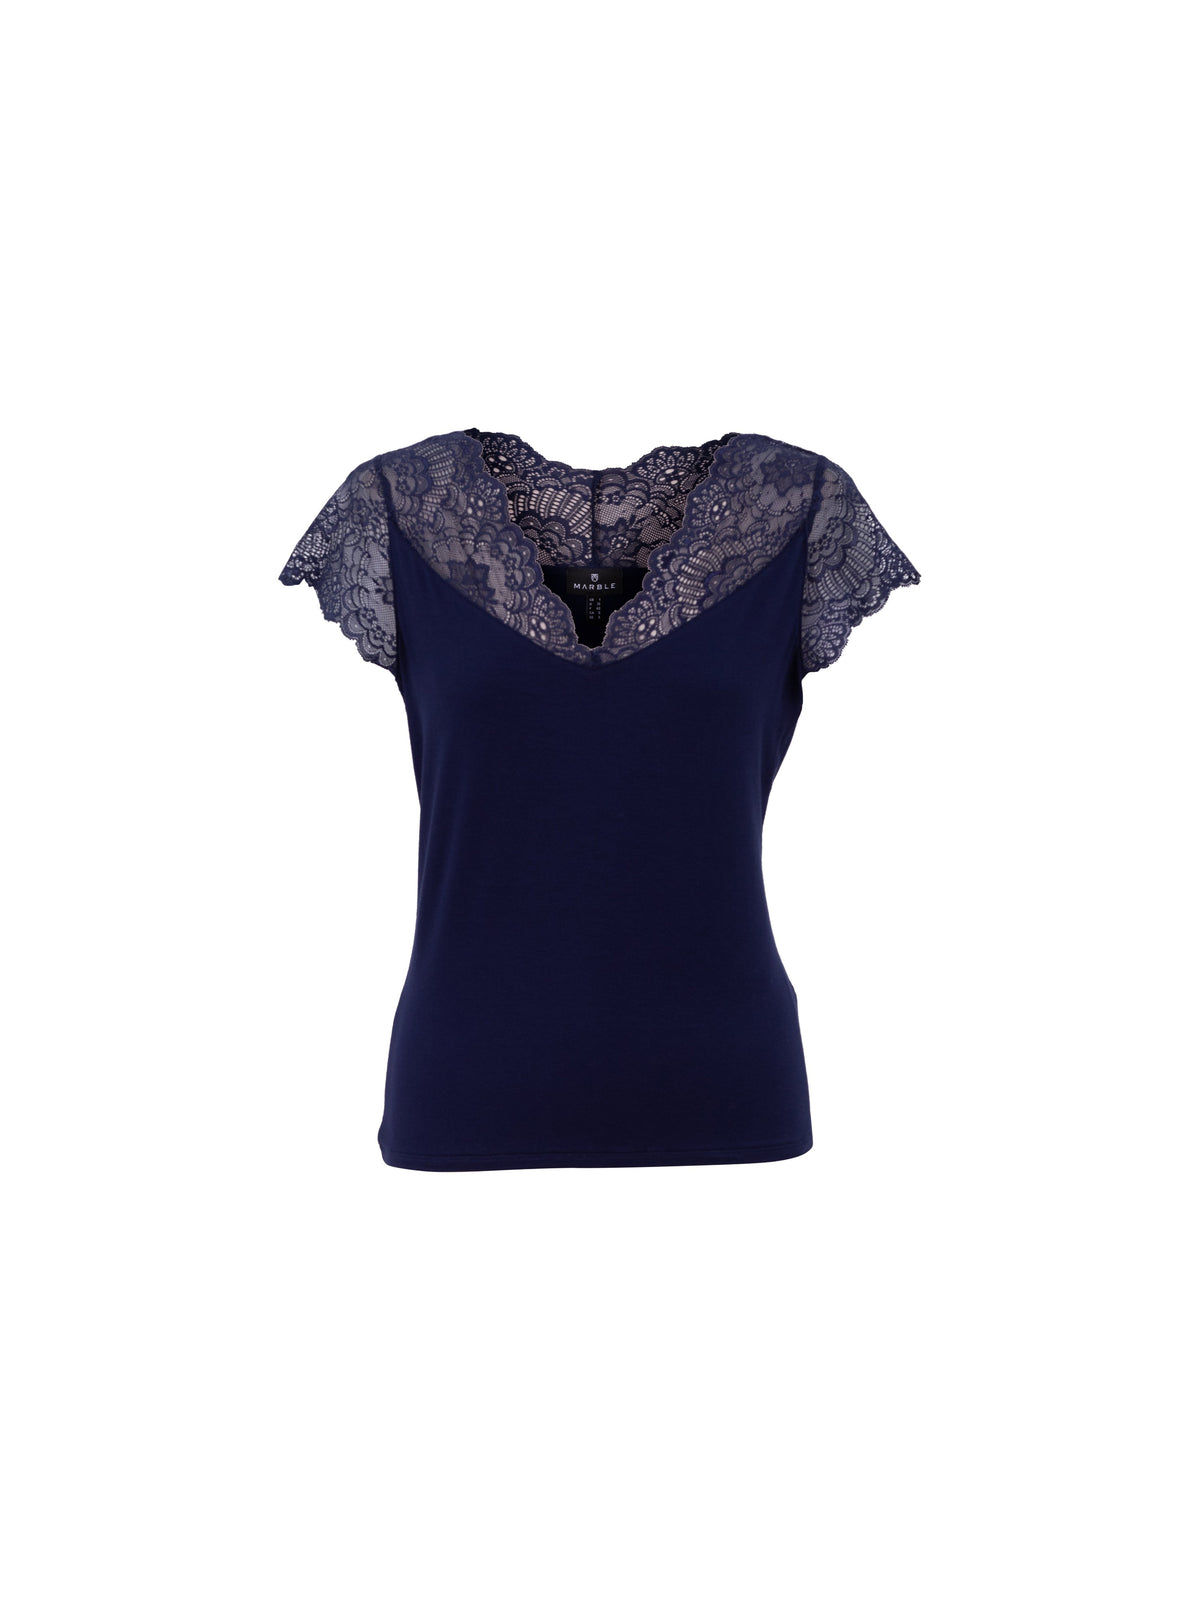 Marble Navy  Top with Lace Trim